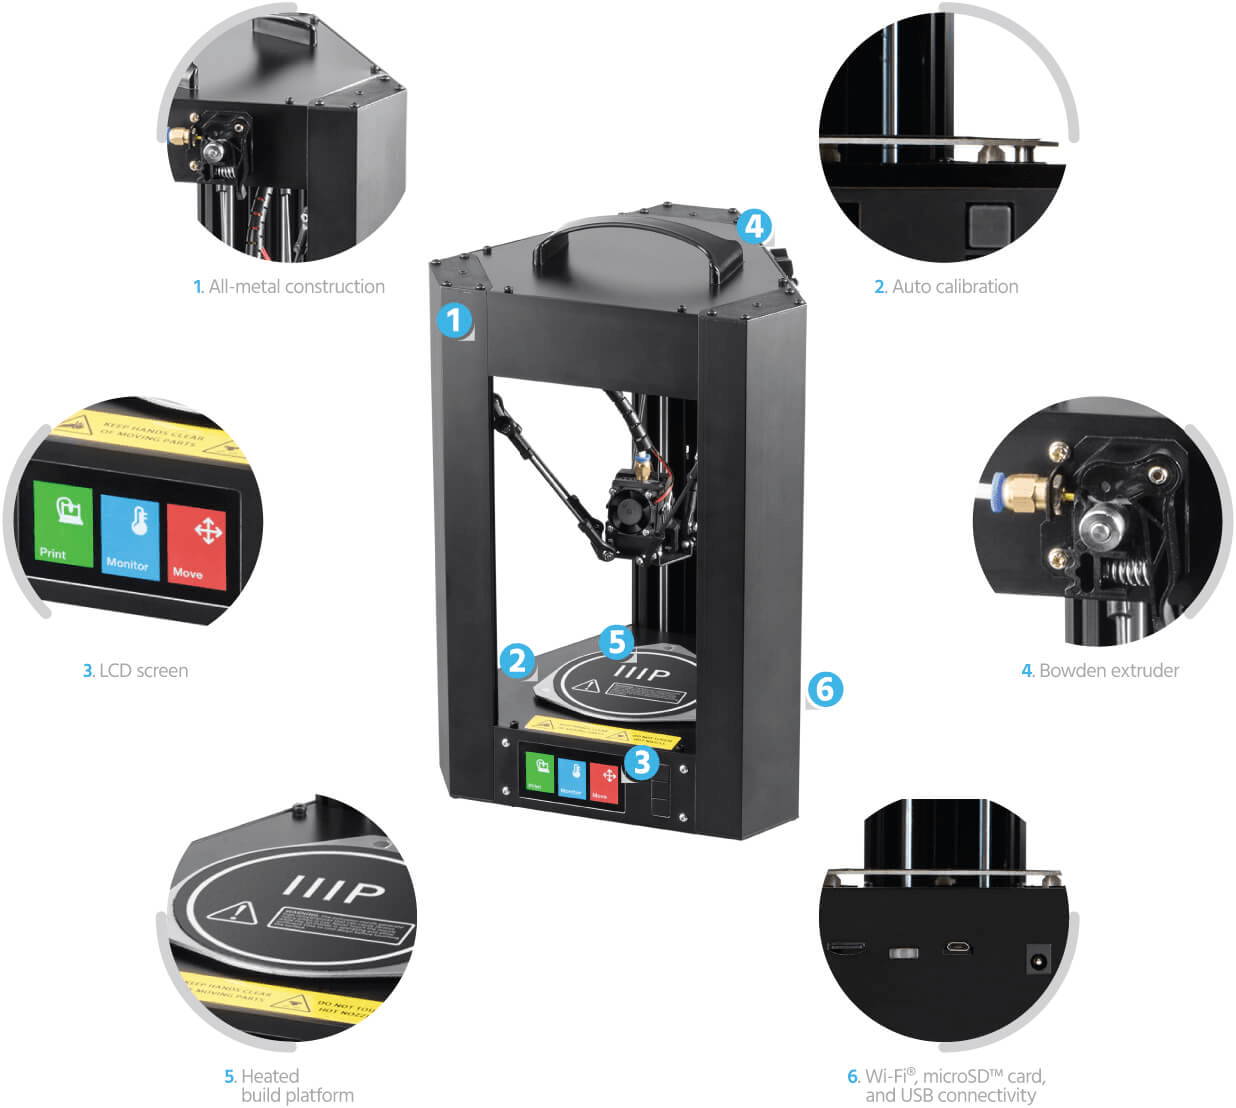  Features of the upcoming Monoprice MP Mini Delta 3D printer 